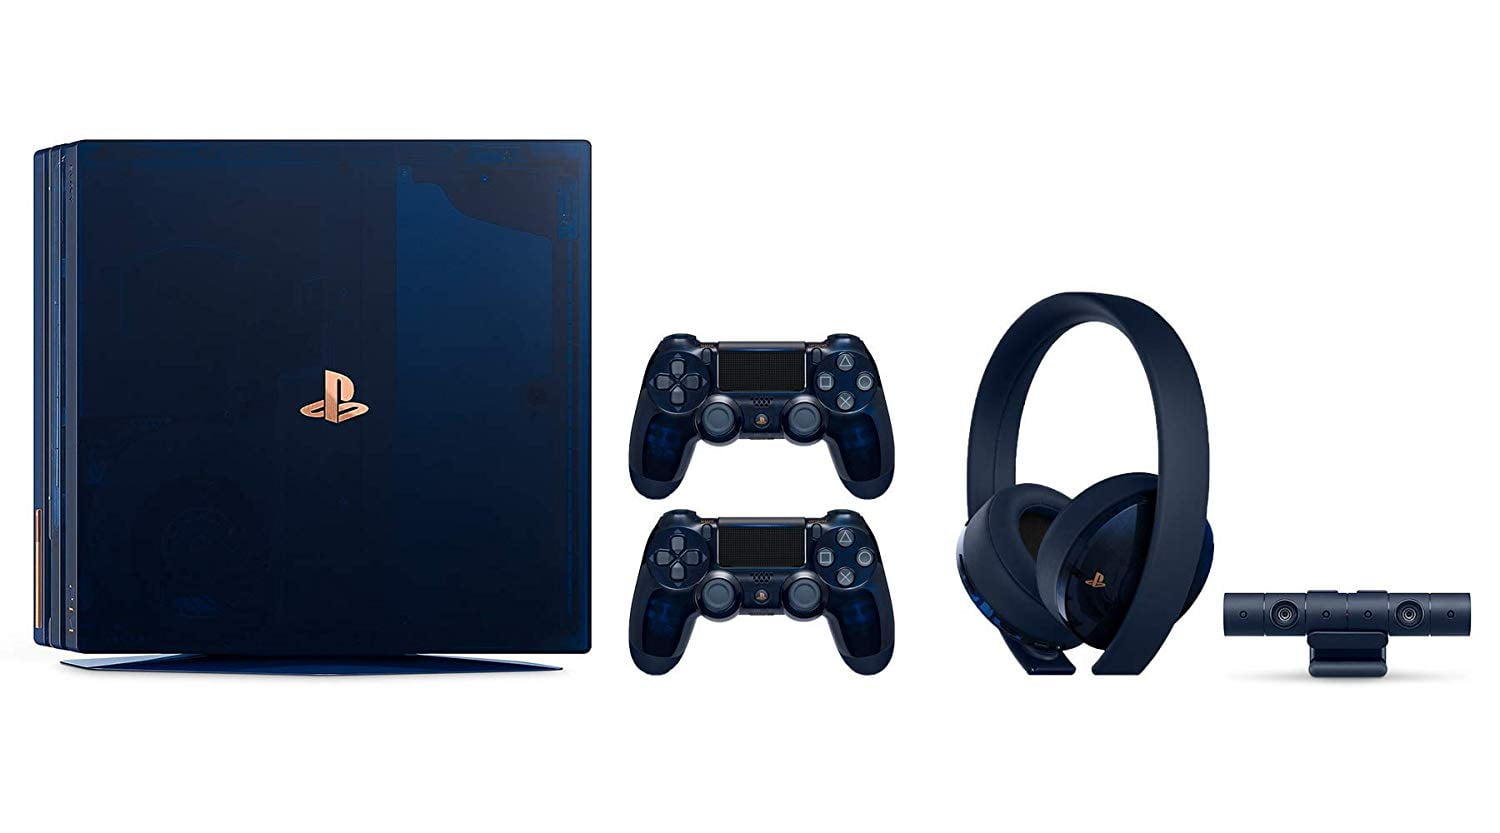 Playstation 4 PRO 500 Million Limited Edition Complete Collection:  Translucent Blue 2TB Playstation 4 Pro Bundle (Limited to 50,000 Units  Worldwide) 